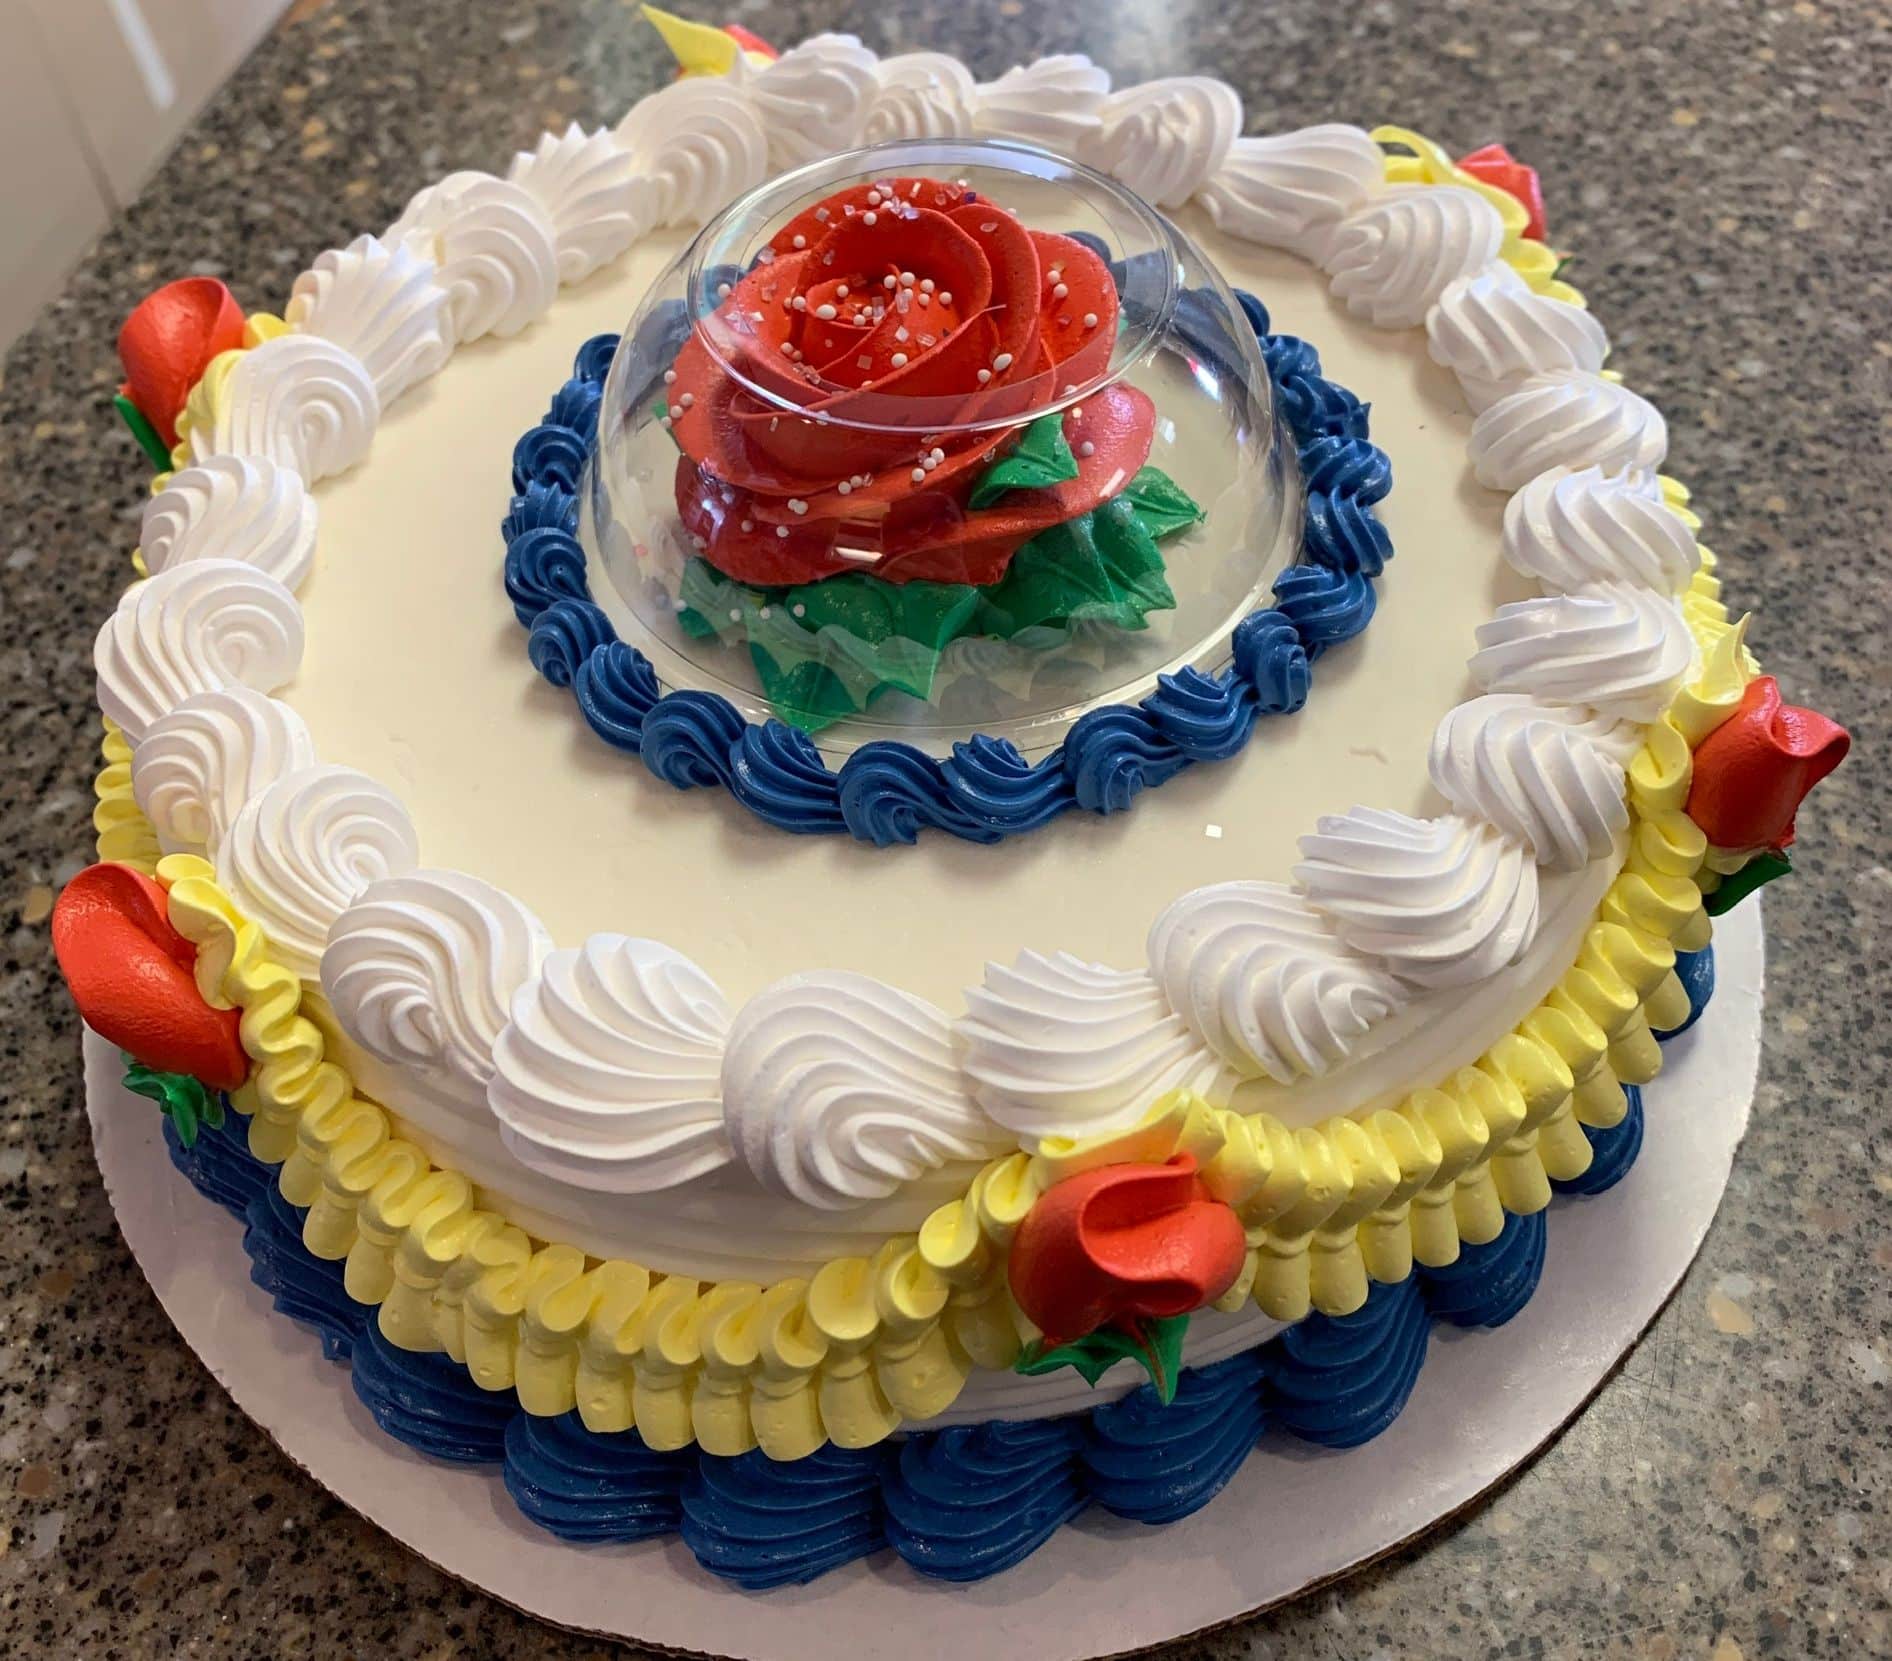 Dairy Queen cake by Sam @dqcakesbysongroup